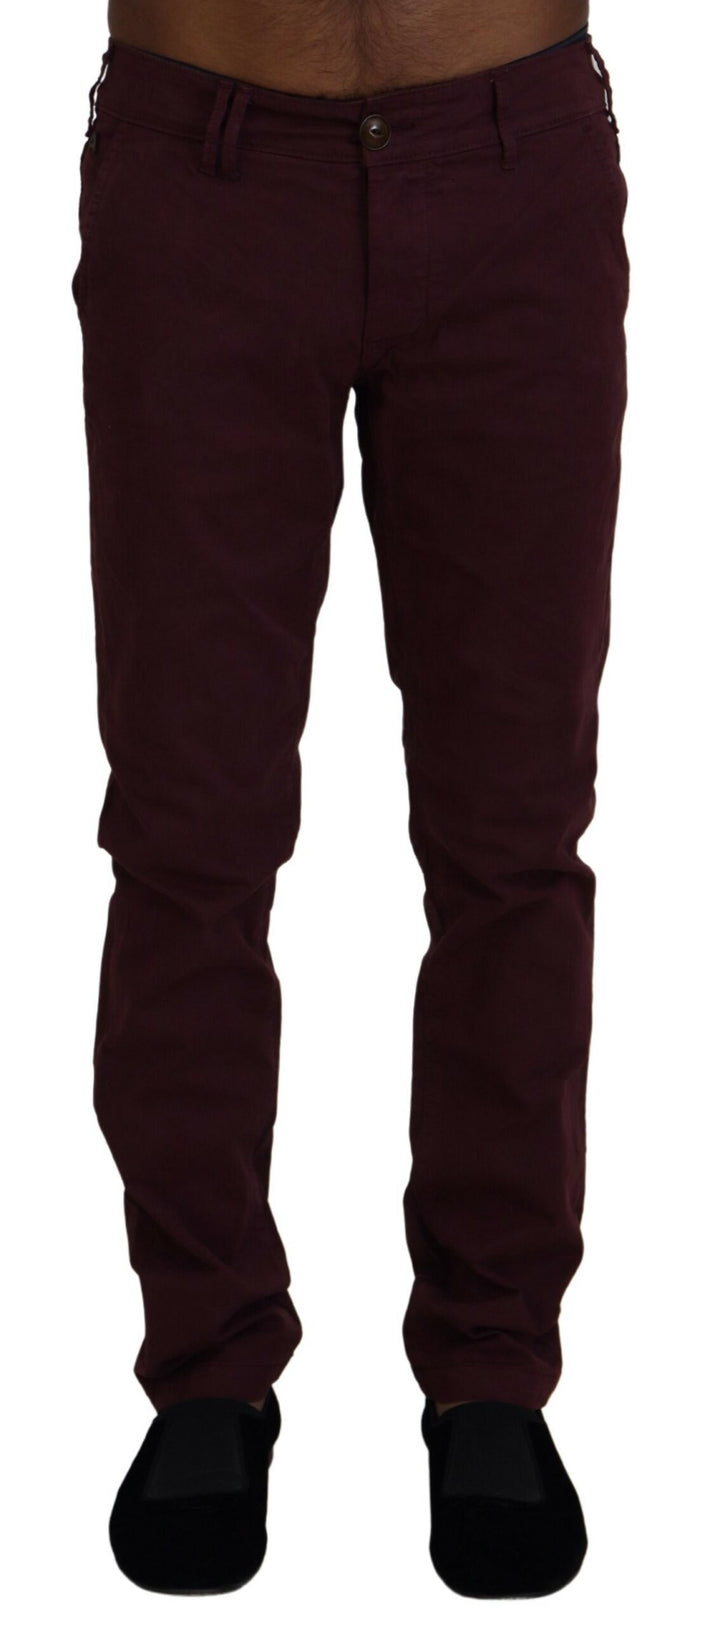 CYCLE Maroon Skinny Fit Cotton Pants